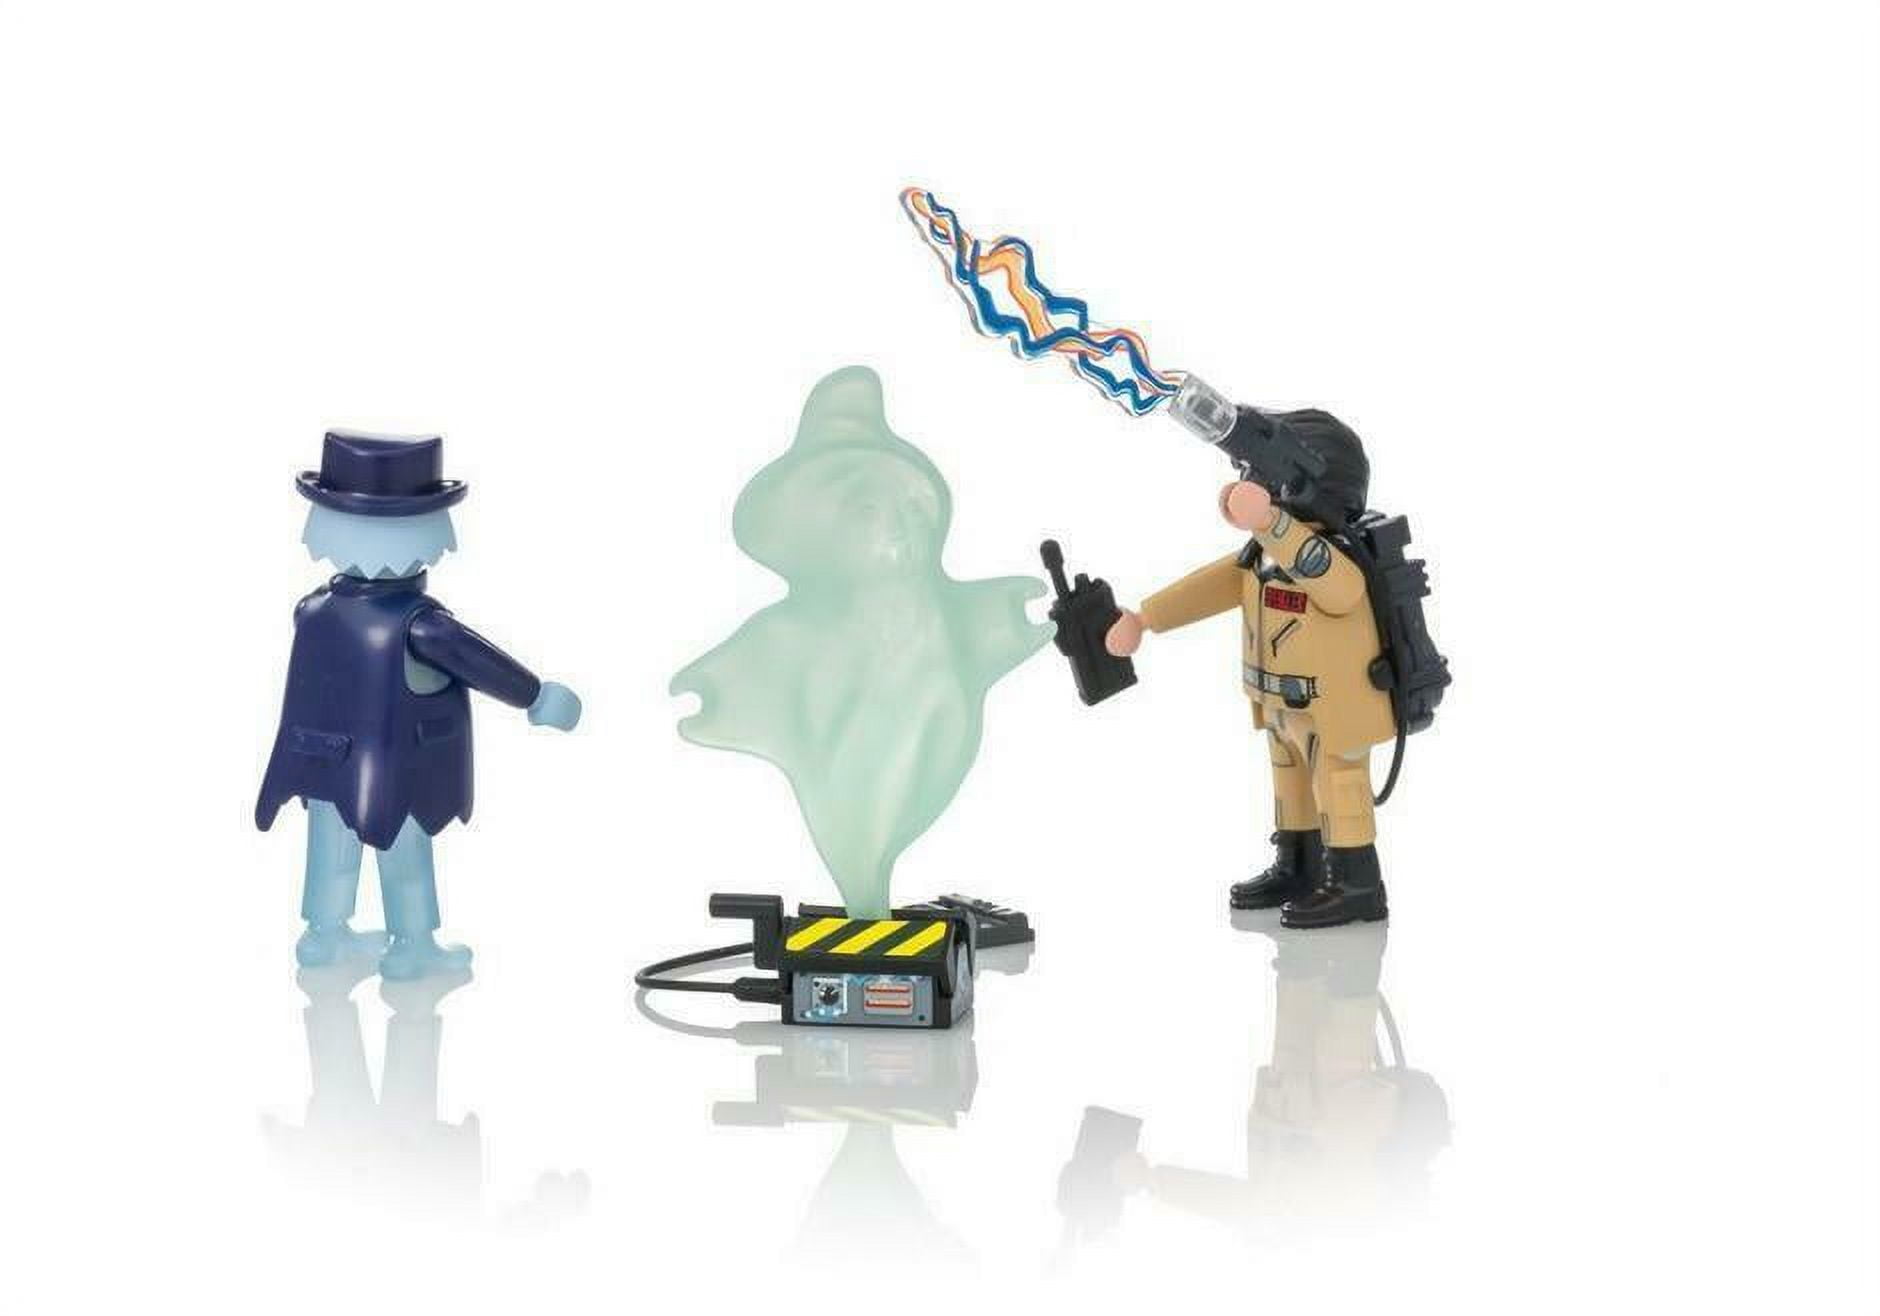 Playmobil Ghostbusters Spengler and Ghost